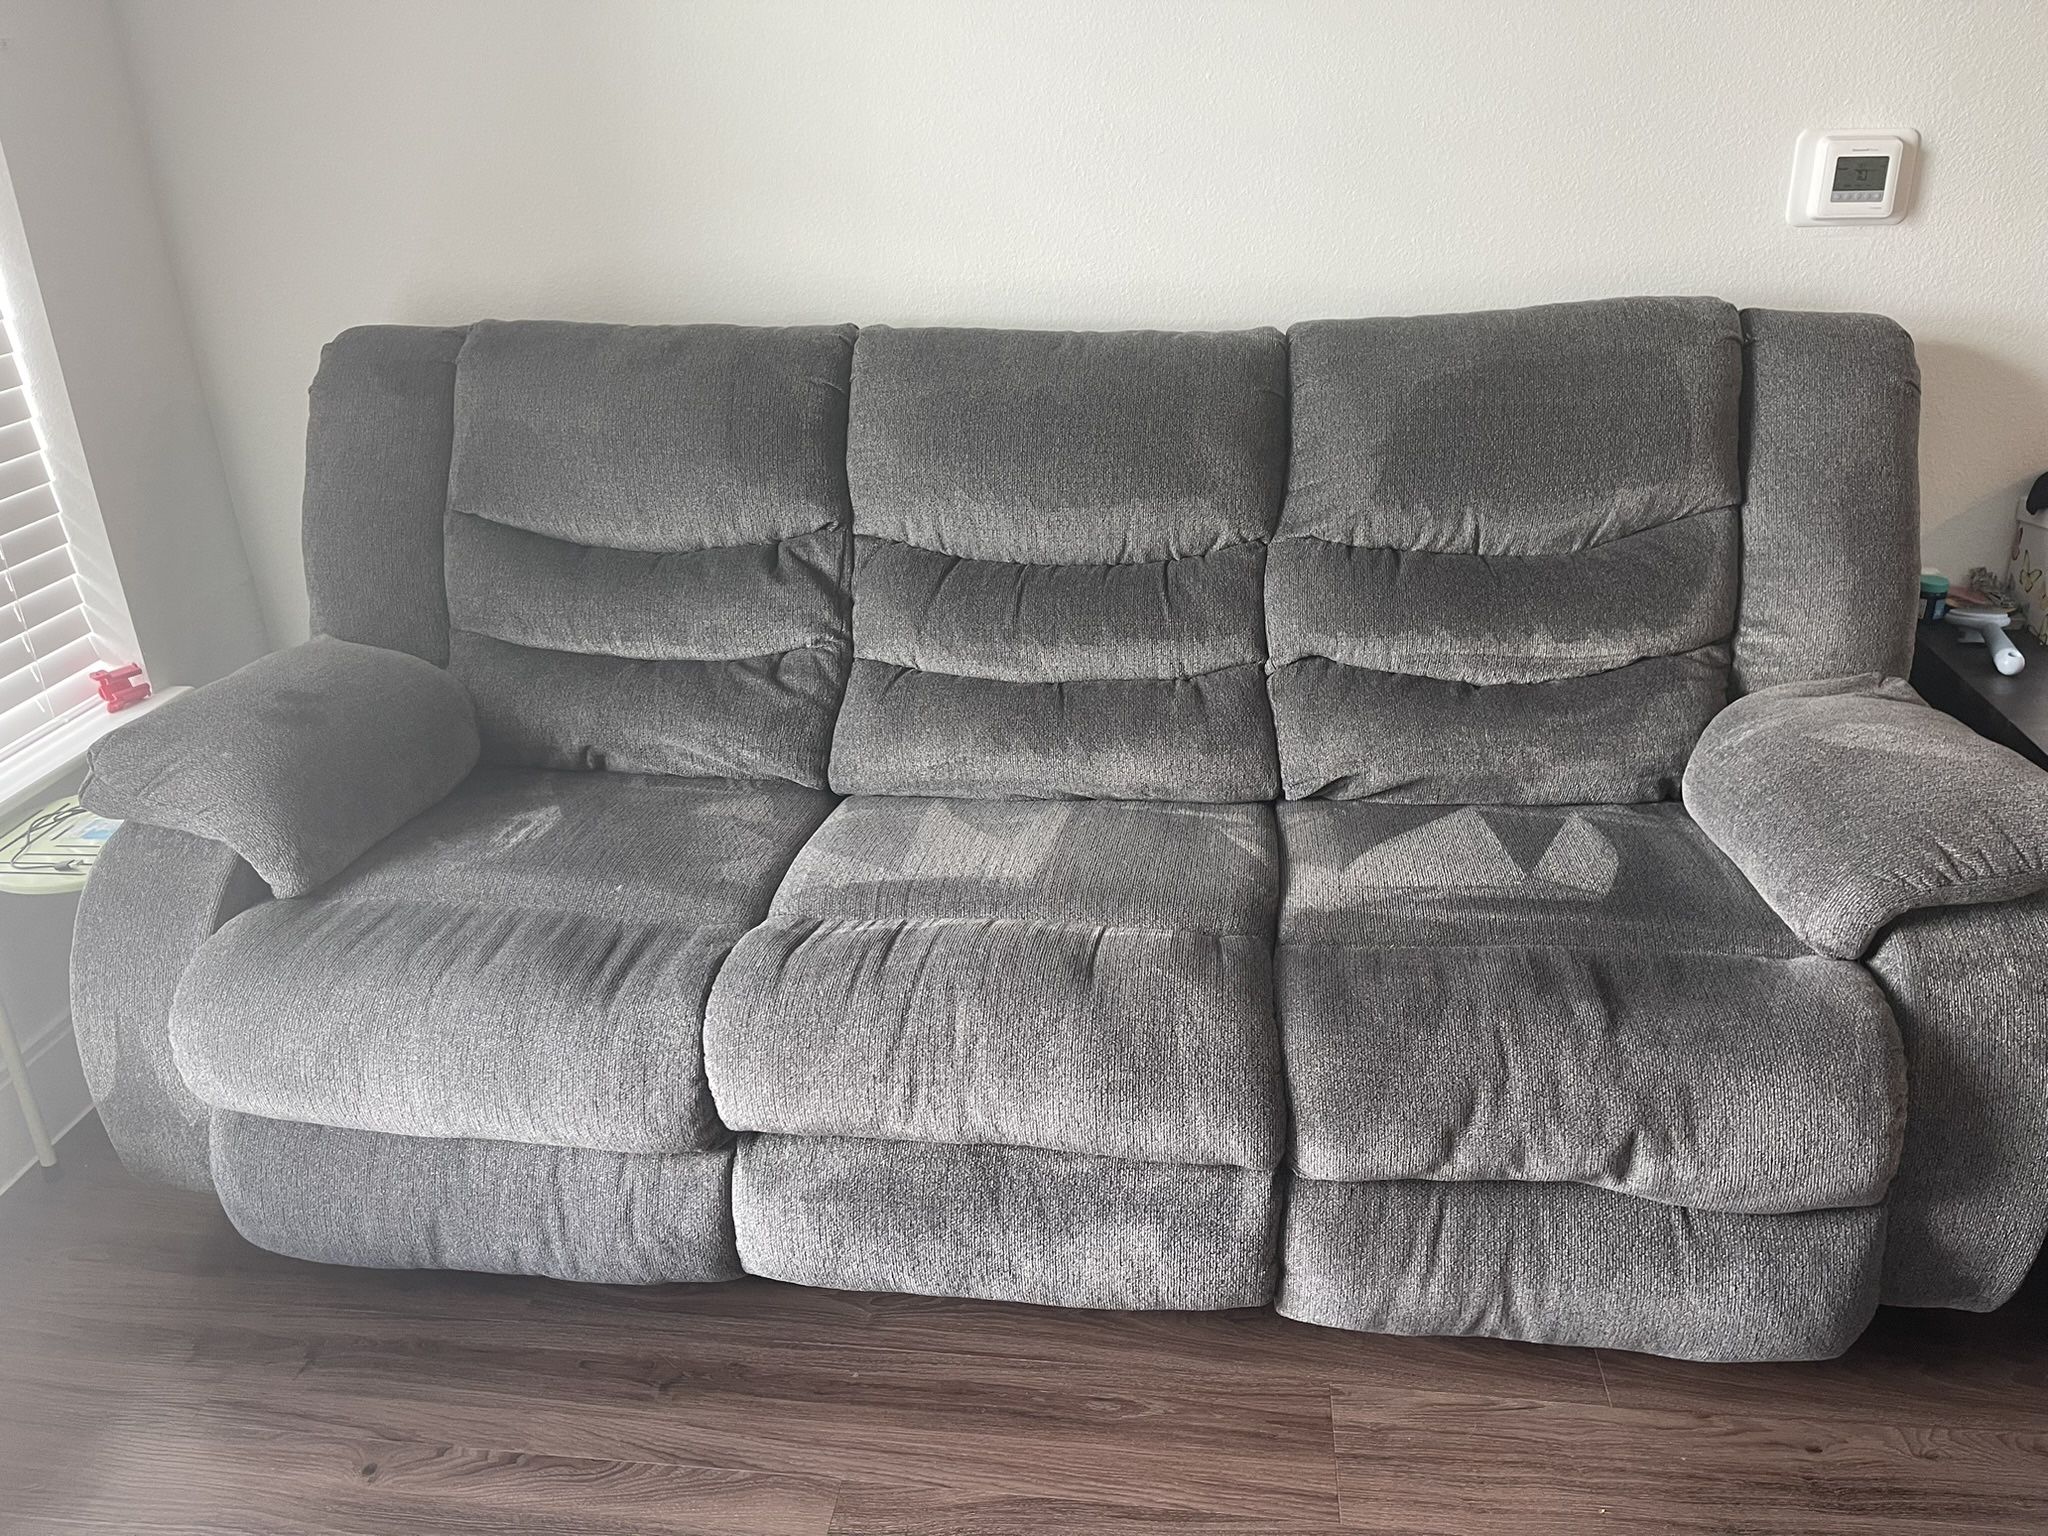 Recliner Couches For Sale 